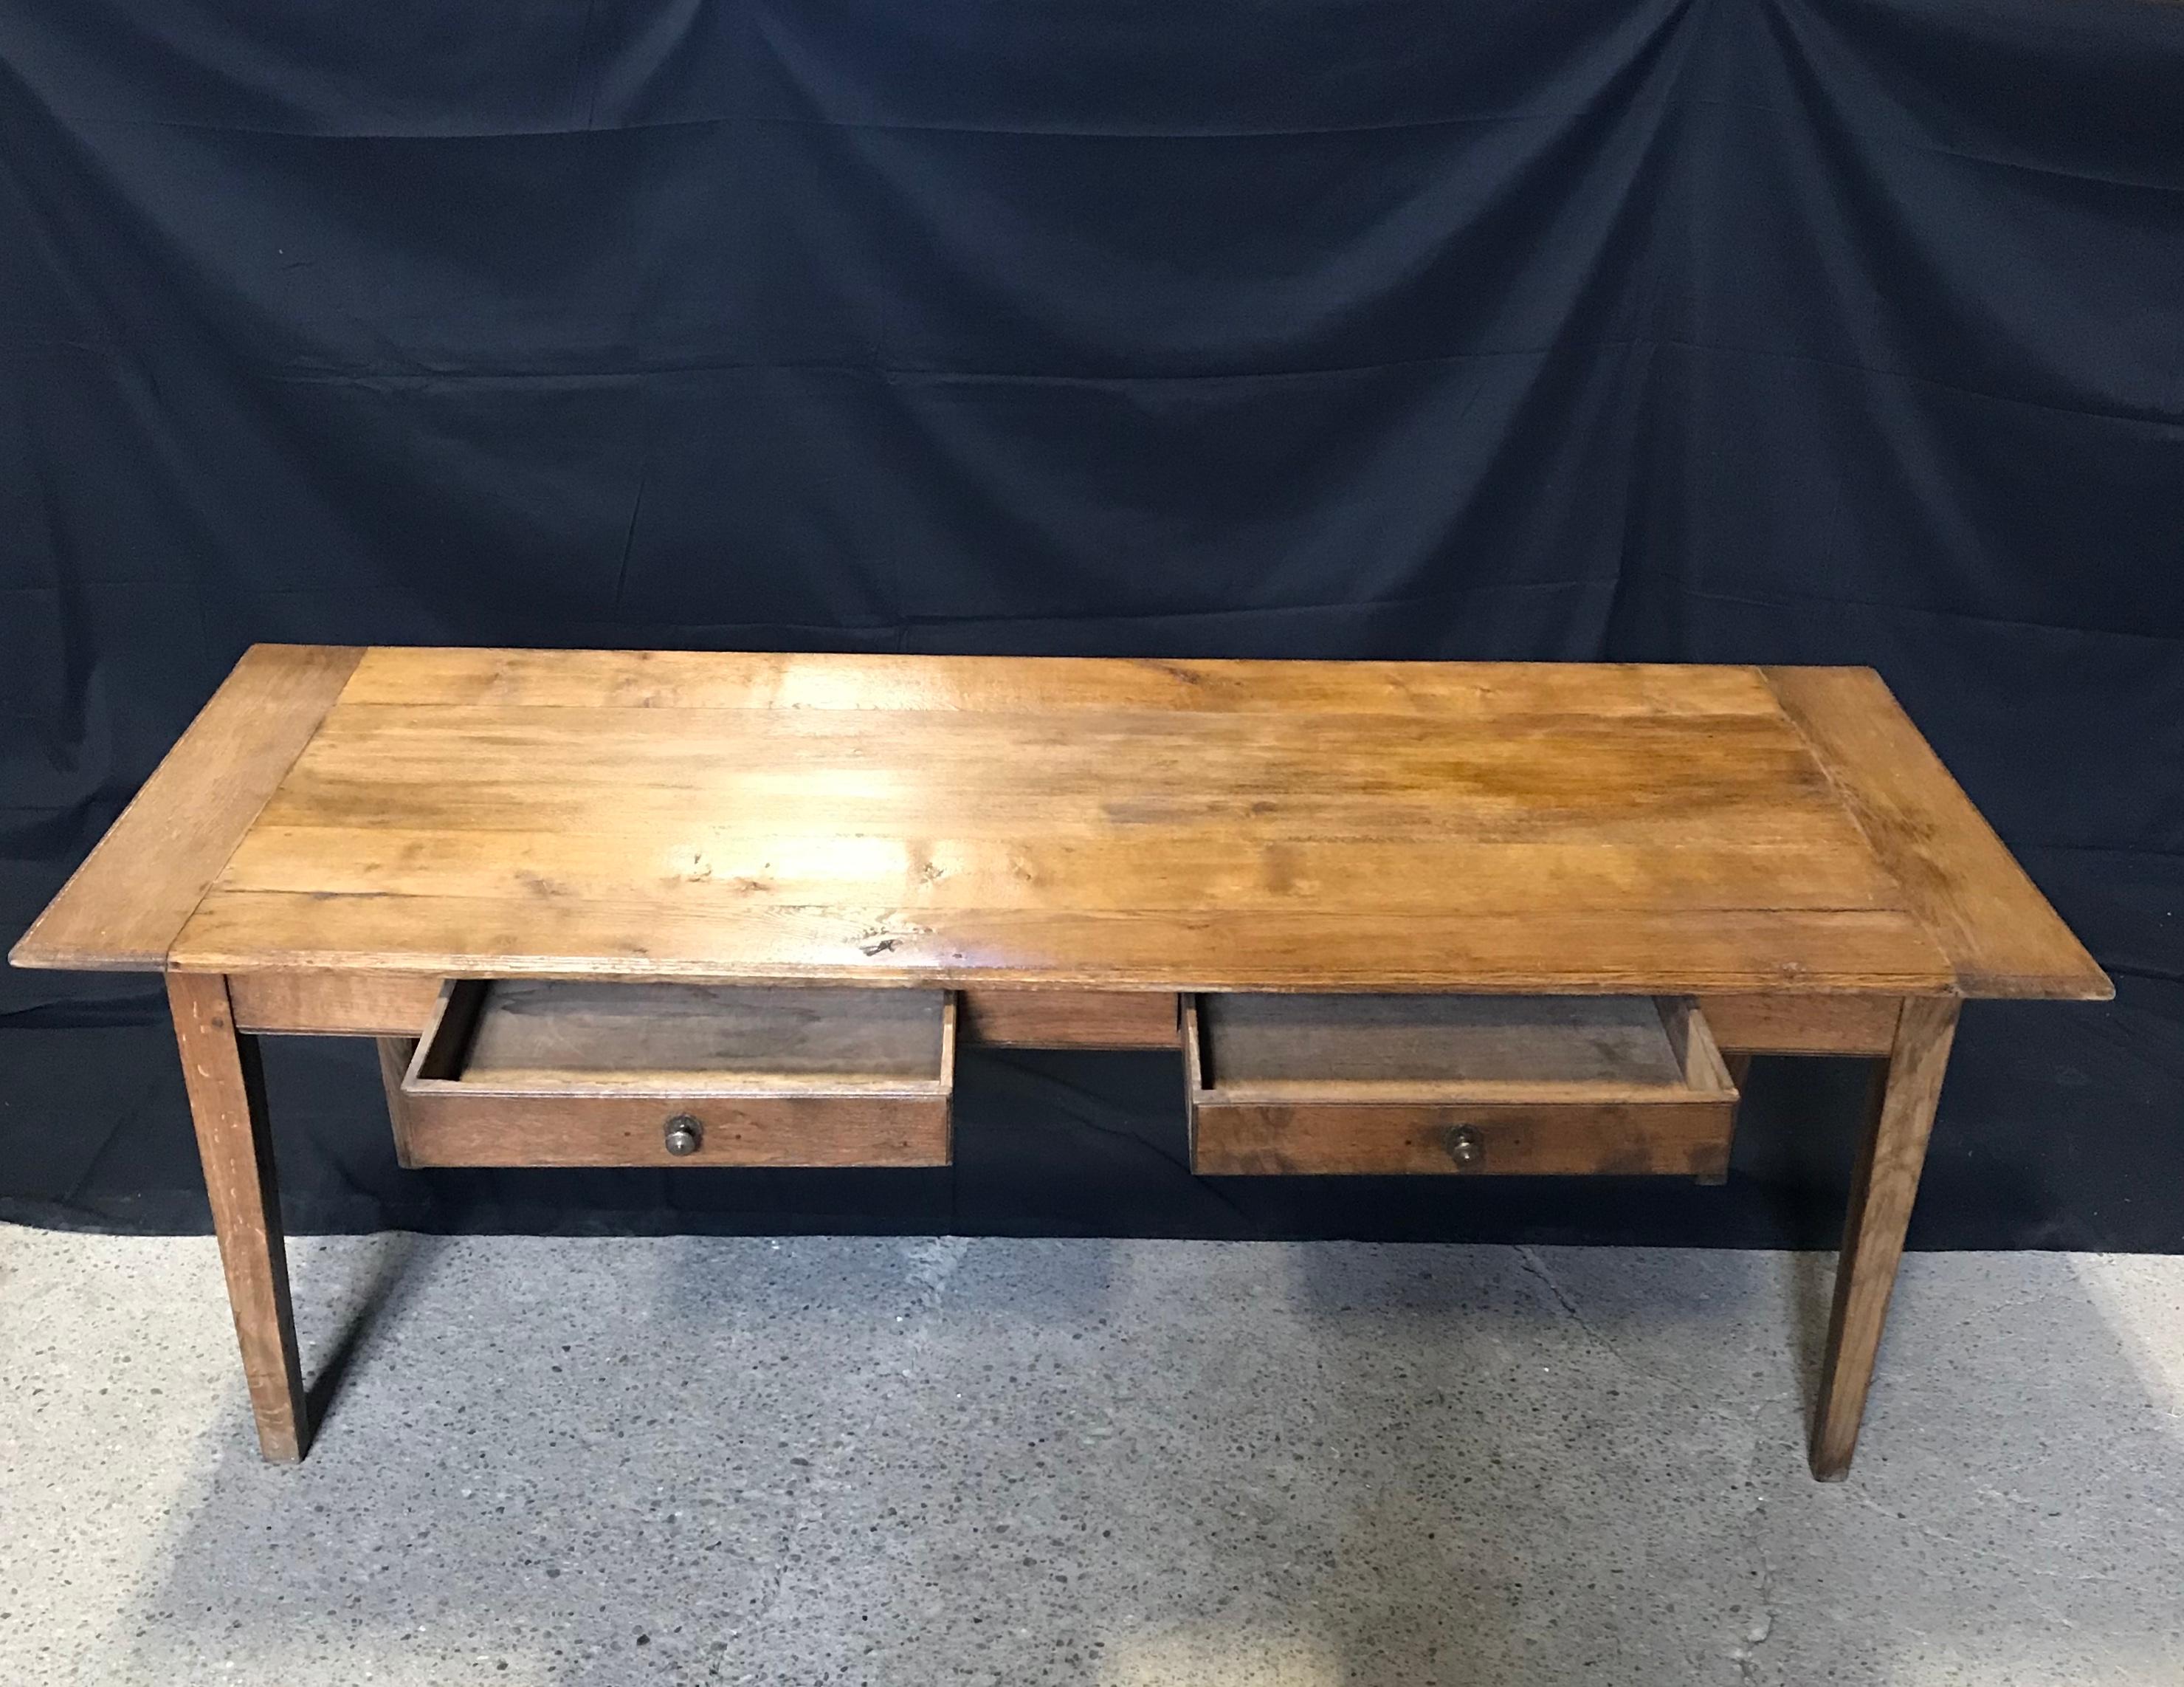 Hard to find authentic and elegant French Provincial farmhouse table with two drawers and tapered legs.
Measures: H skirt 24.5